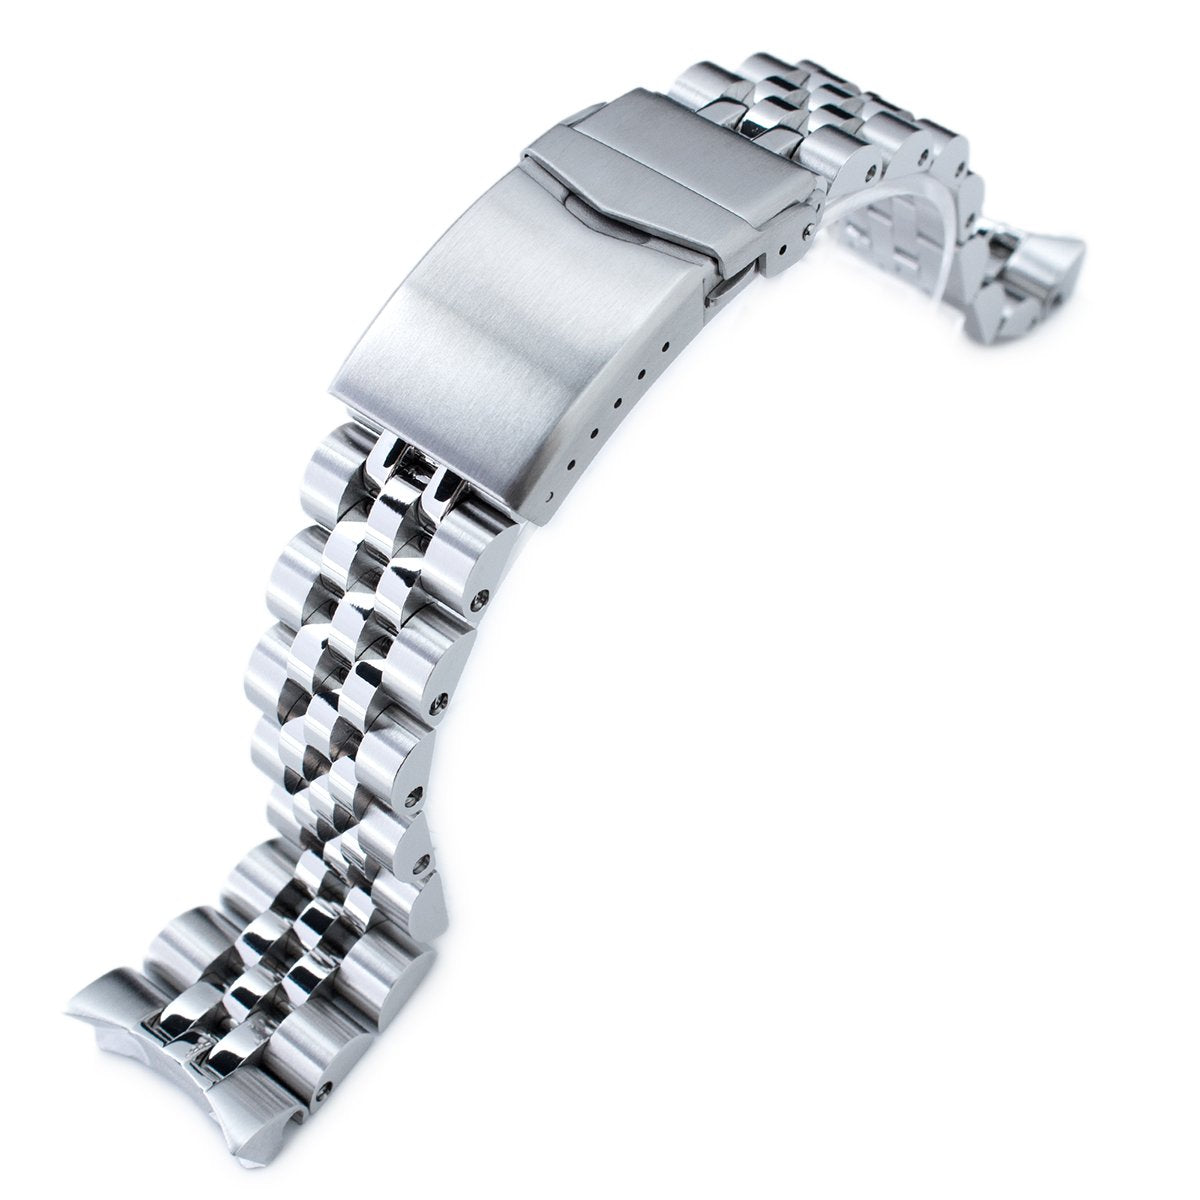 Stainless Steel Bracelet Watch Band 22/20mm Curved End Link for Seiko SKX009  007 | eBay